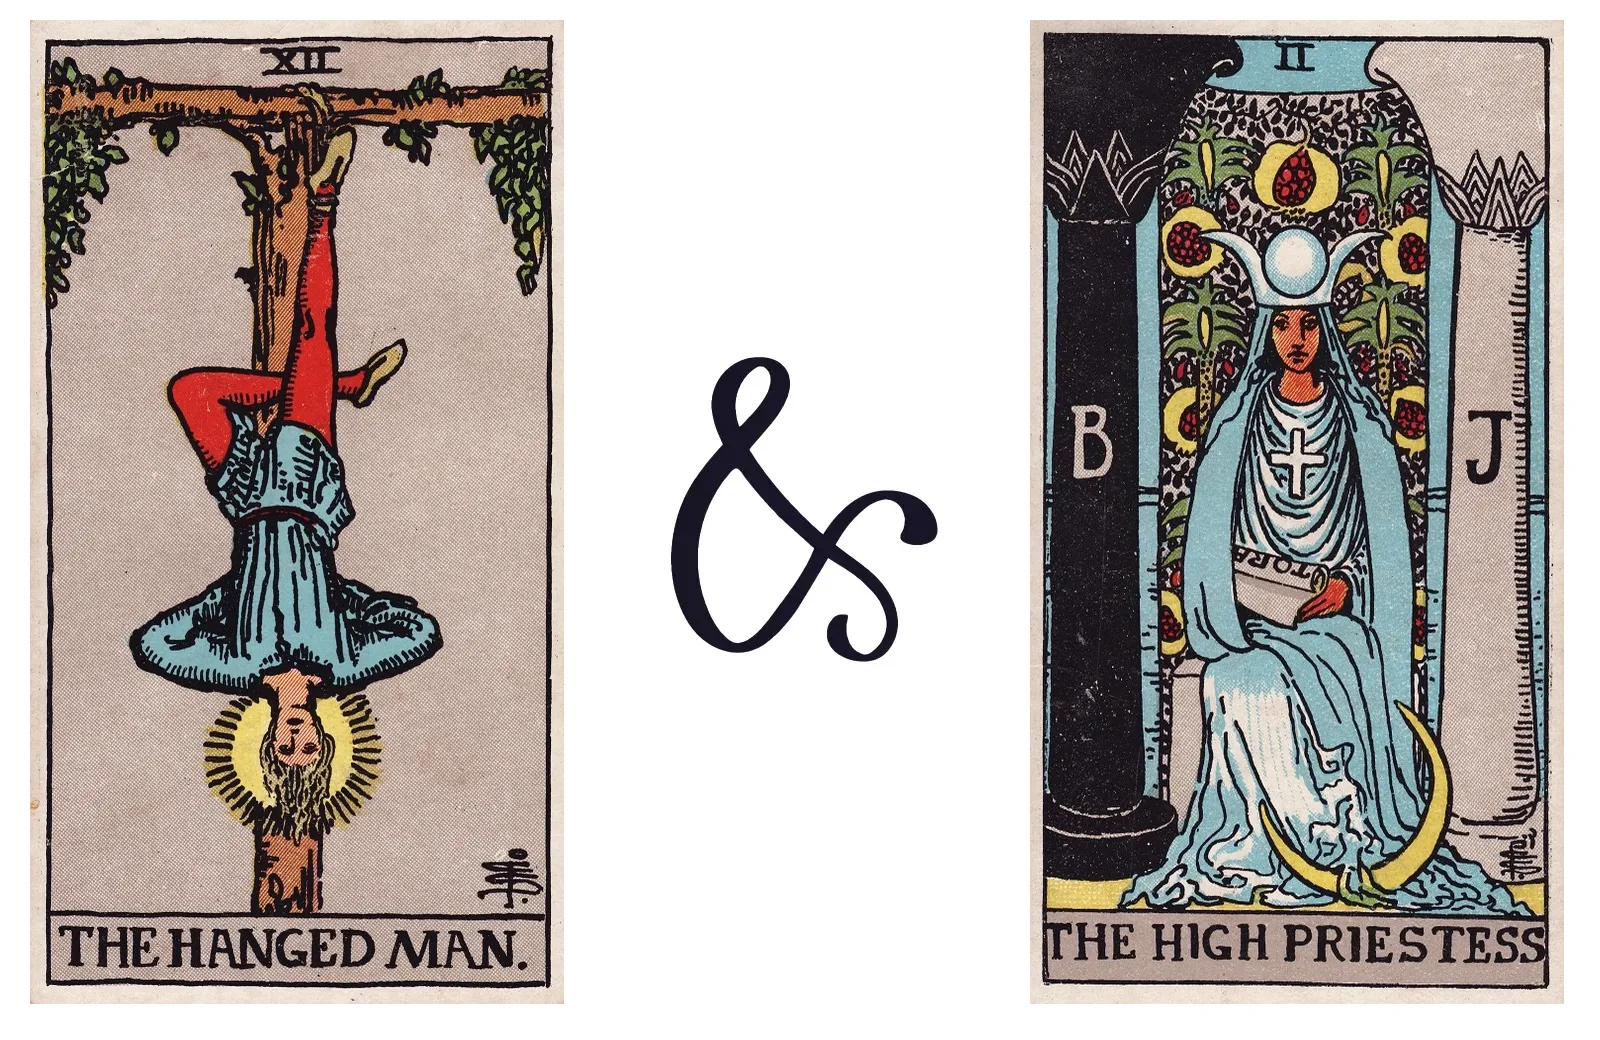 The Hanged Man and The High Priestess